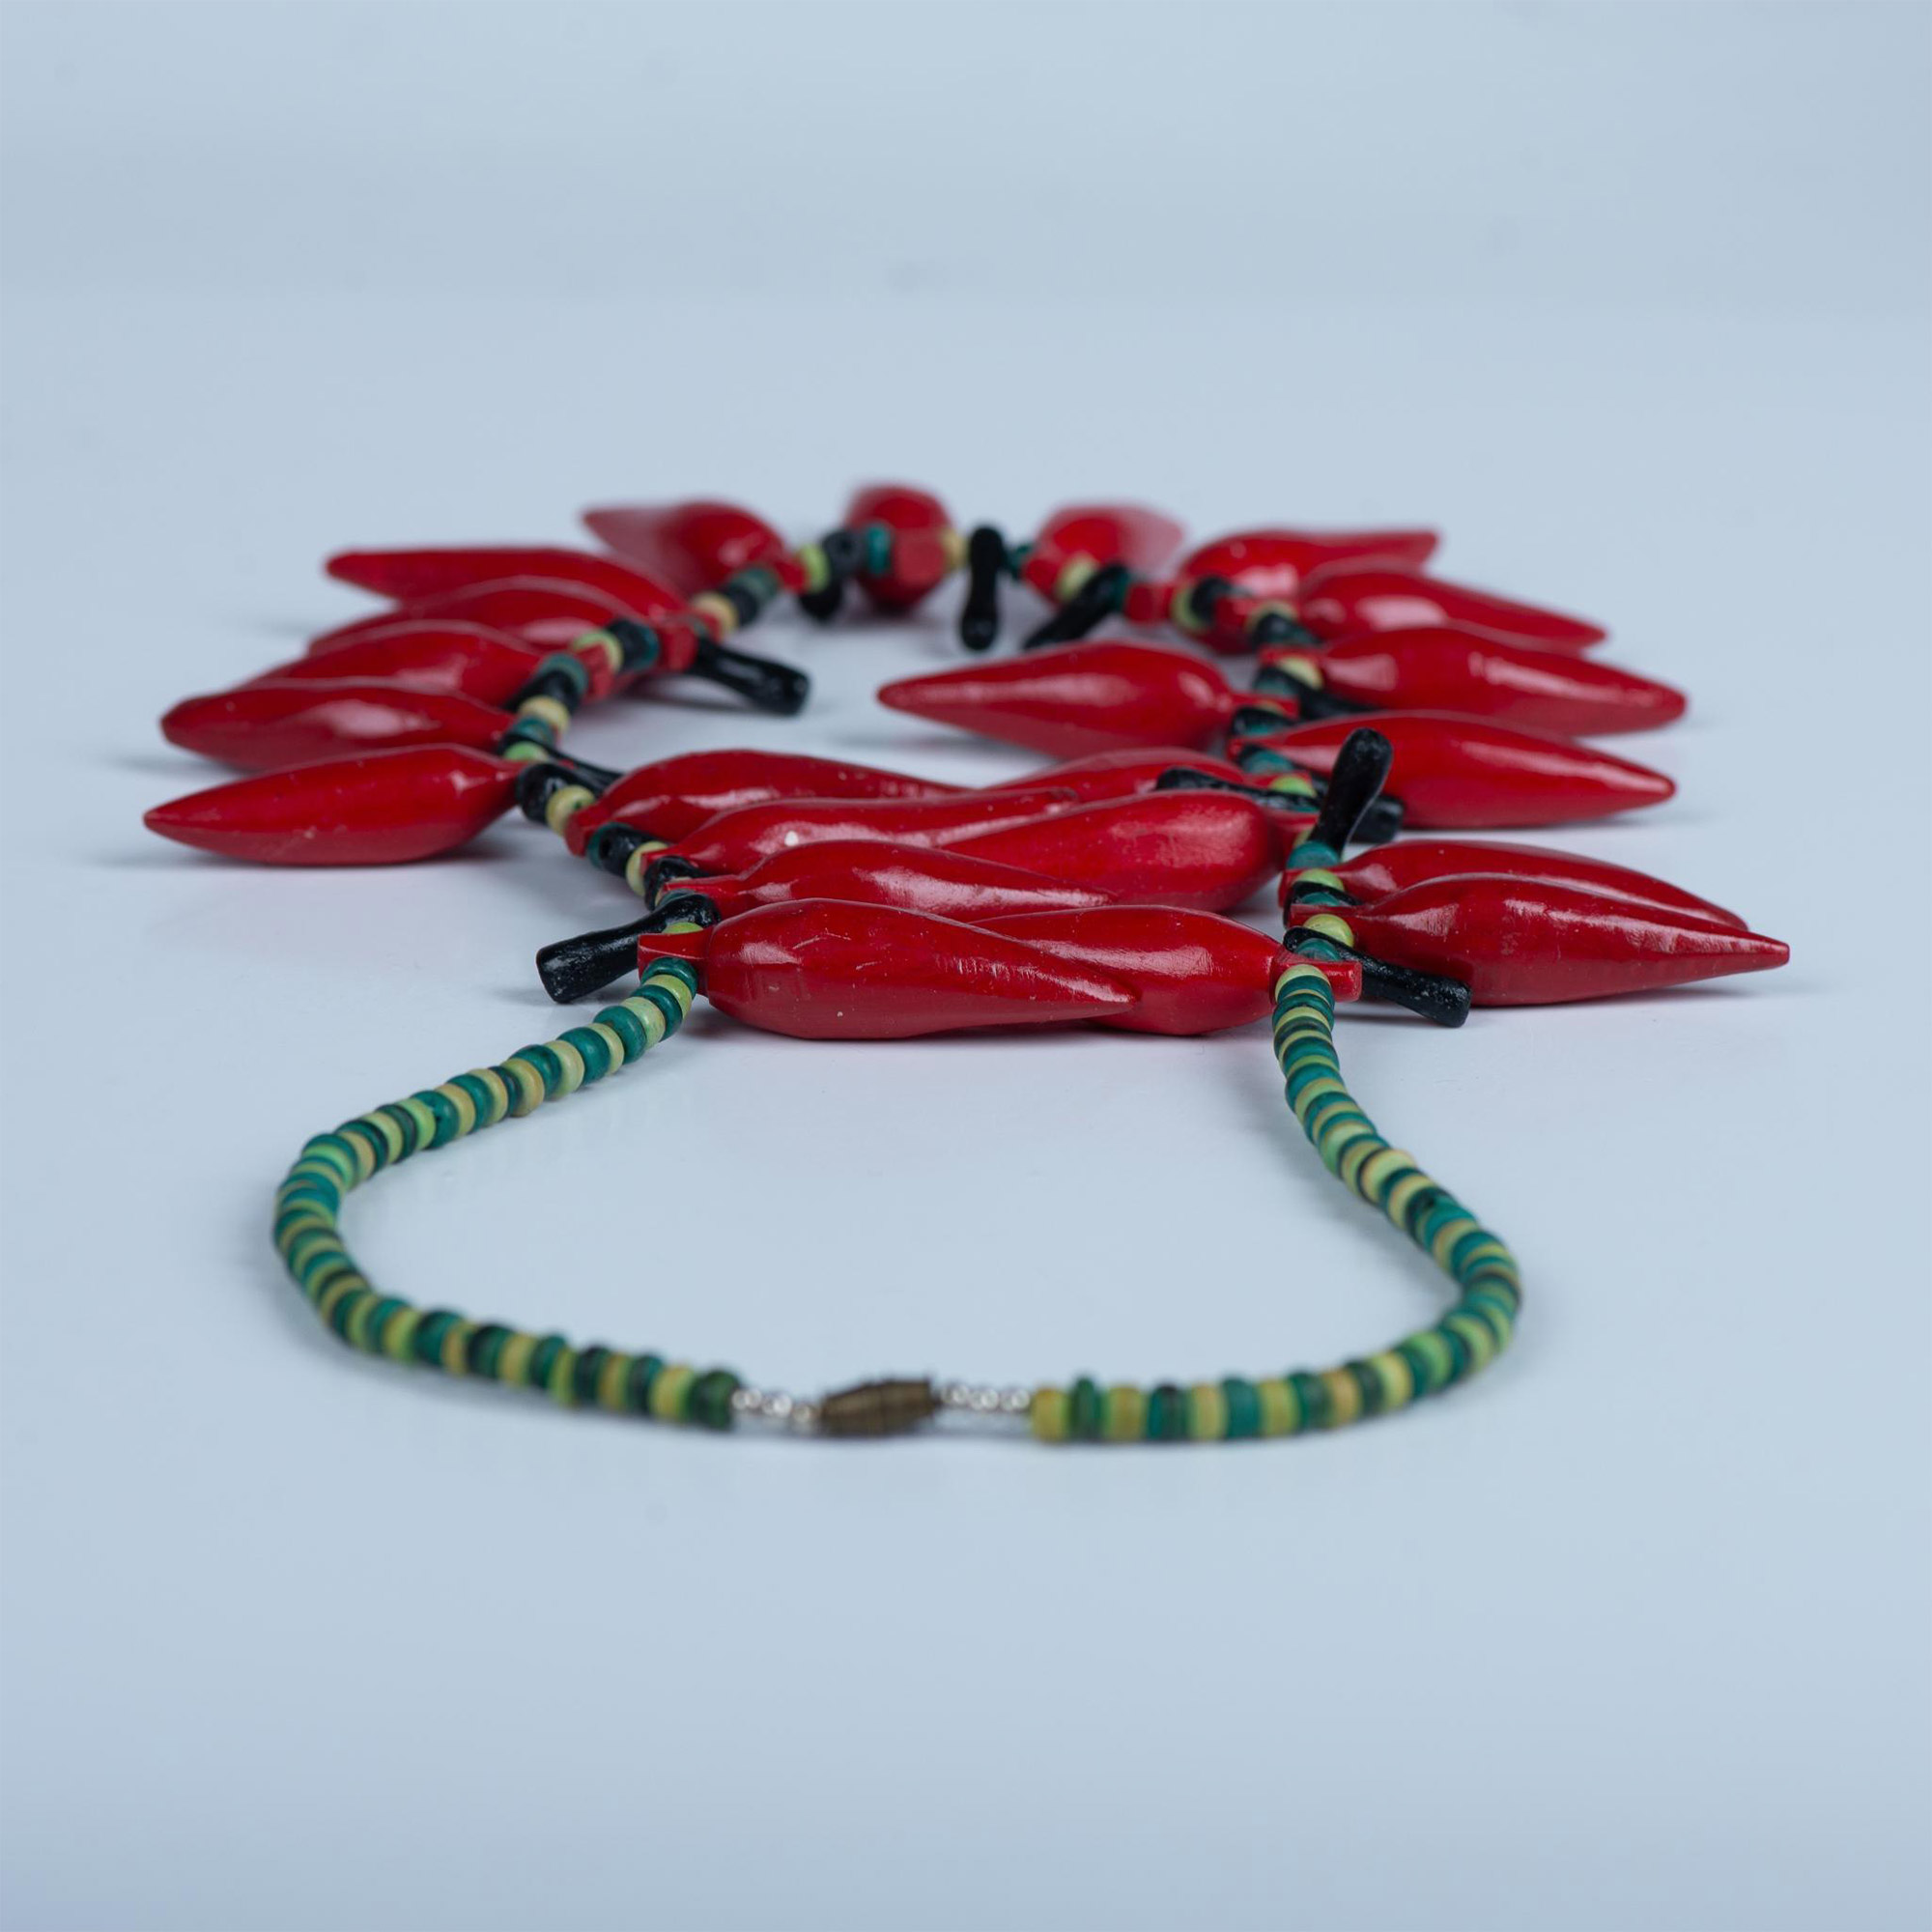 Retro Wood Red Chili Pepper Necklace - Image 6 of 6